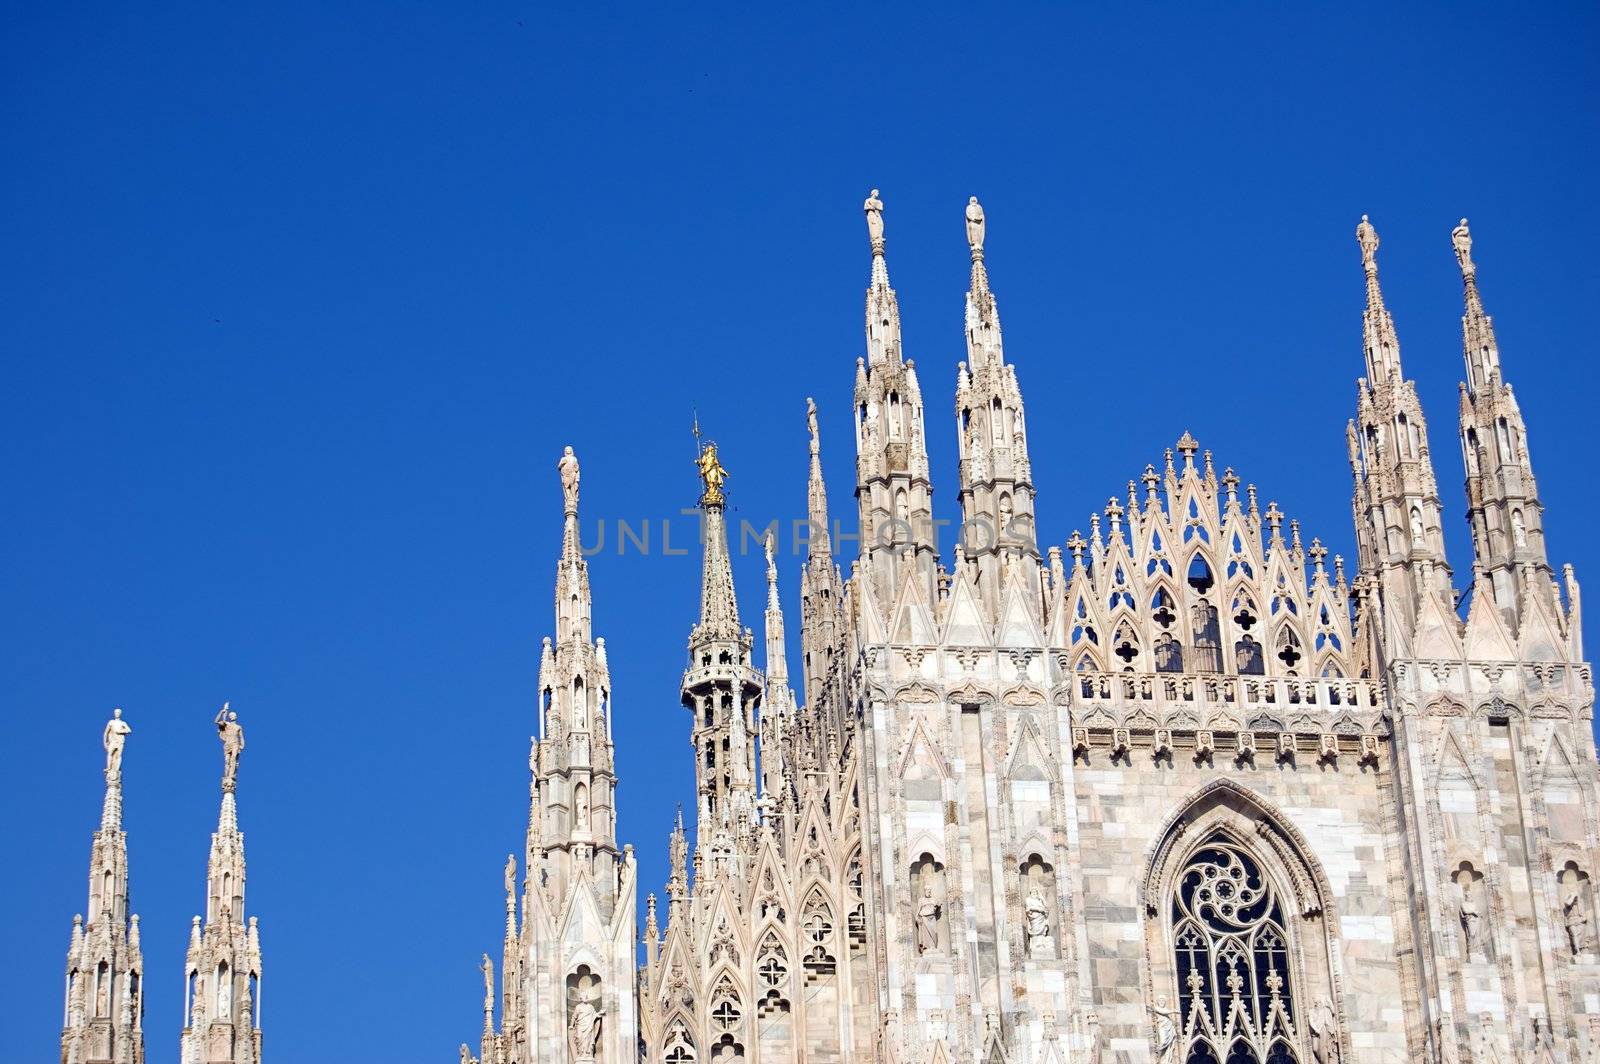 The famous Duomo, cathedral church of Milan, Italy. Details of spires with the "Madonnina" statue of the Virgin Mary